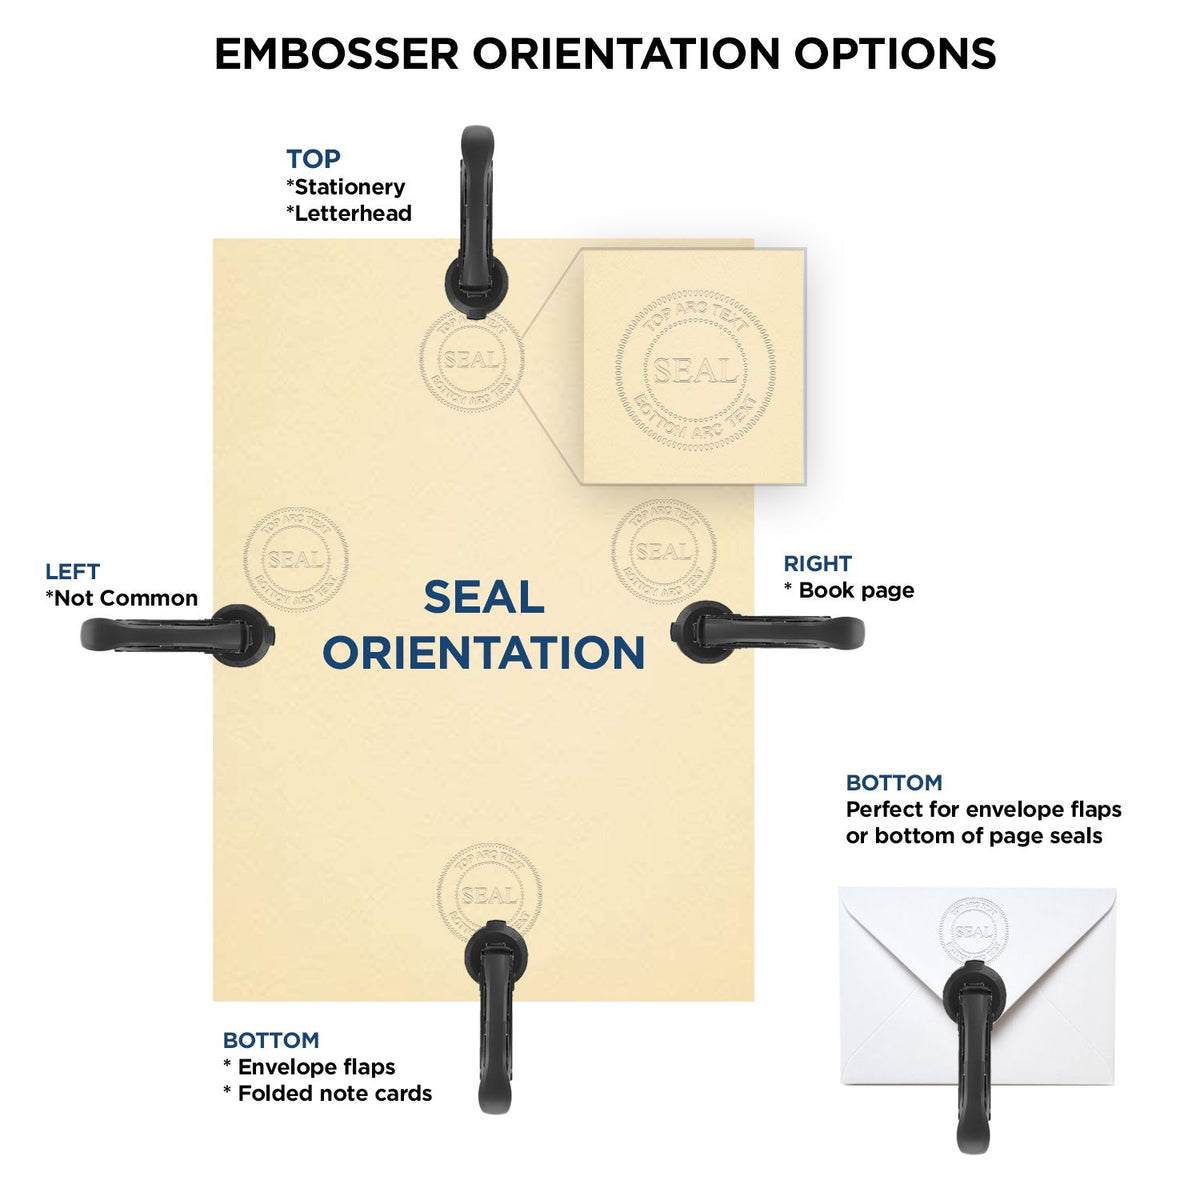 An infographic for the Texas Engineer Desk Seal showing embosser orientation, this is showing examples of a top, bottom, right and left insert.